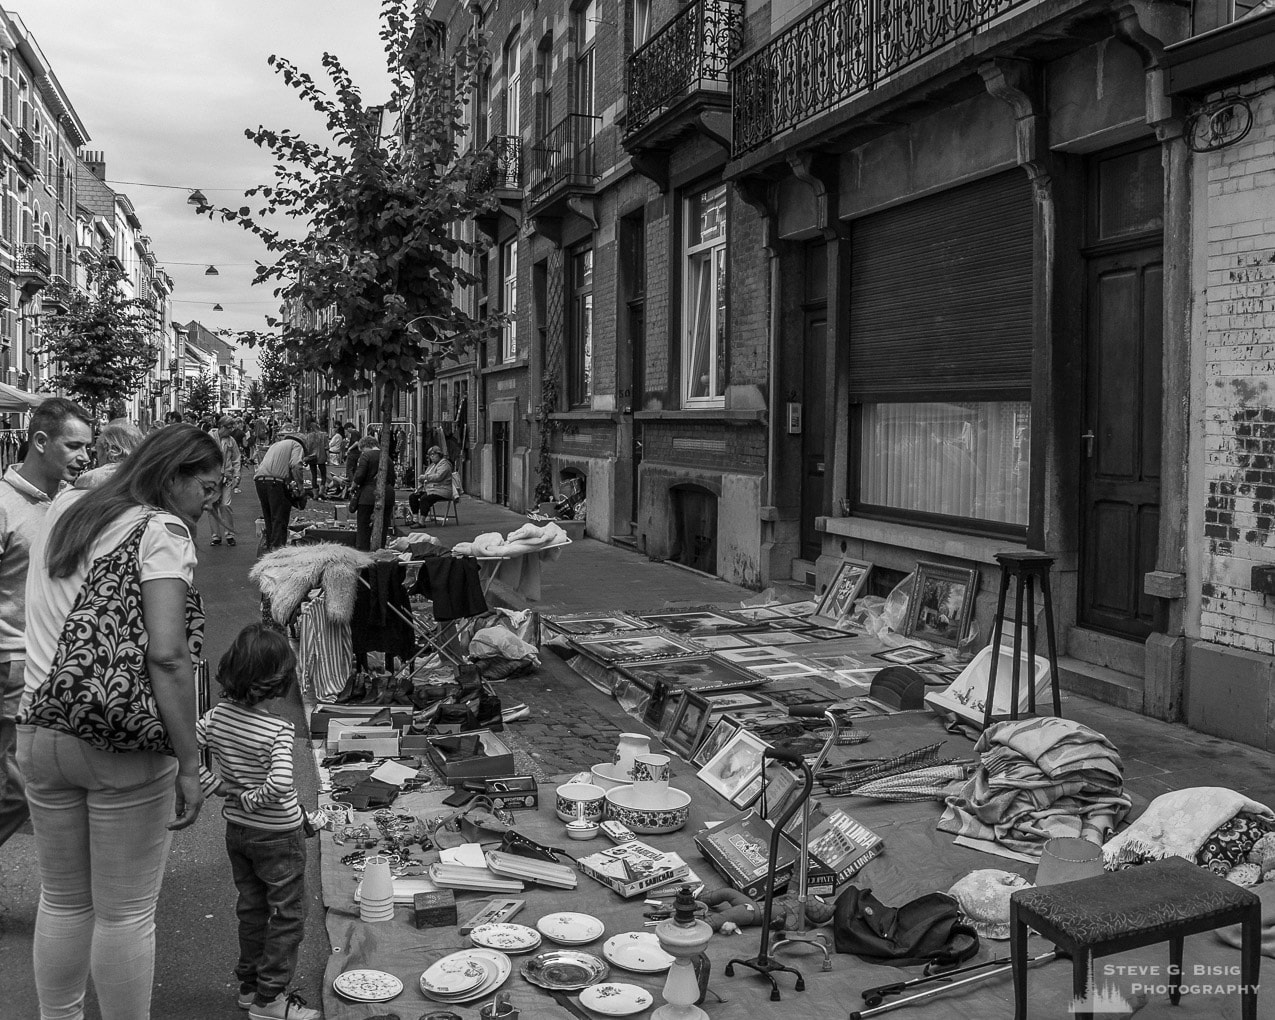 Photo 6/32 of a series of black and white photographs from the 2018 Grande Braderie D'Ixelles sidewalk sale and street festival in Brussels, Belgium.